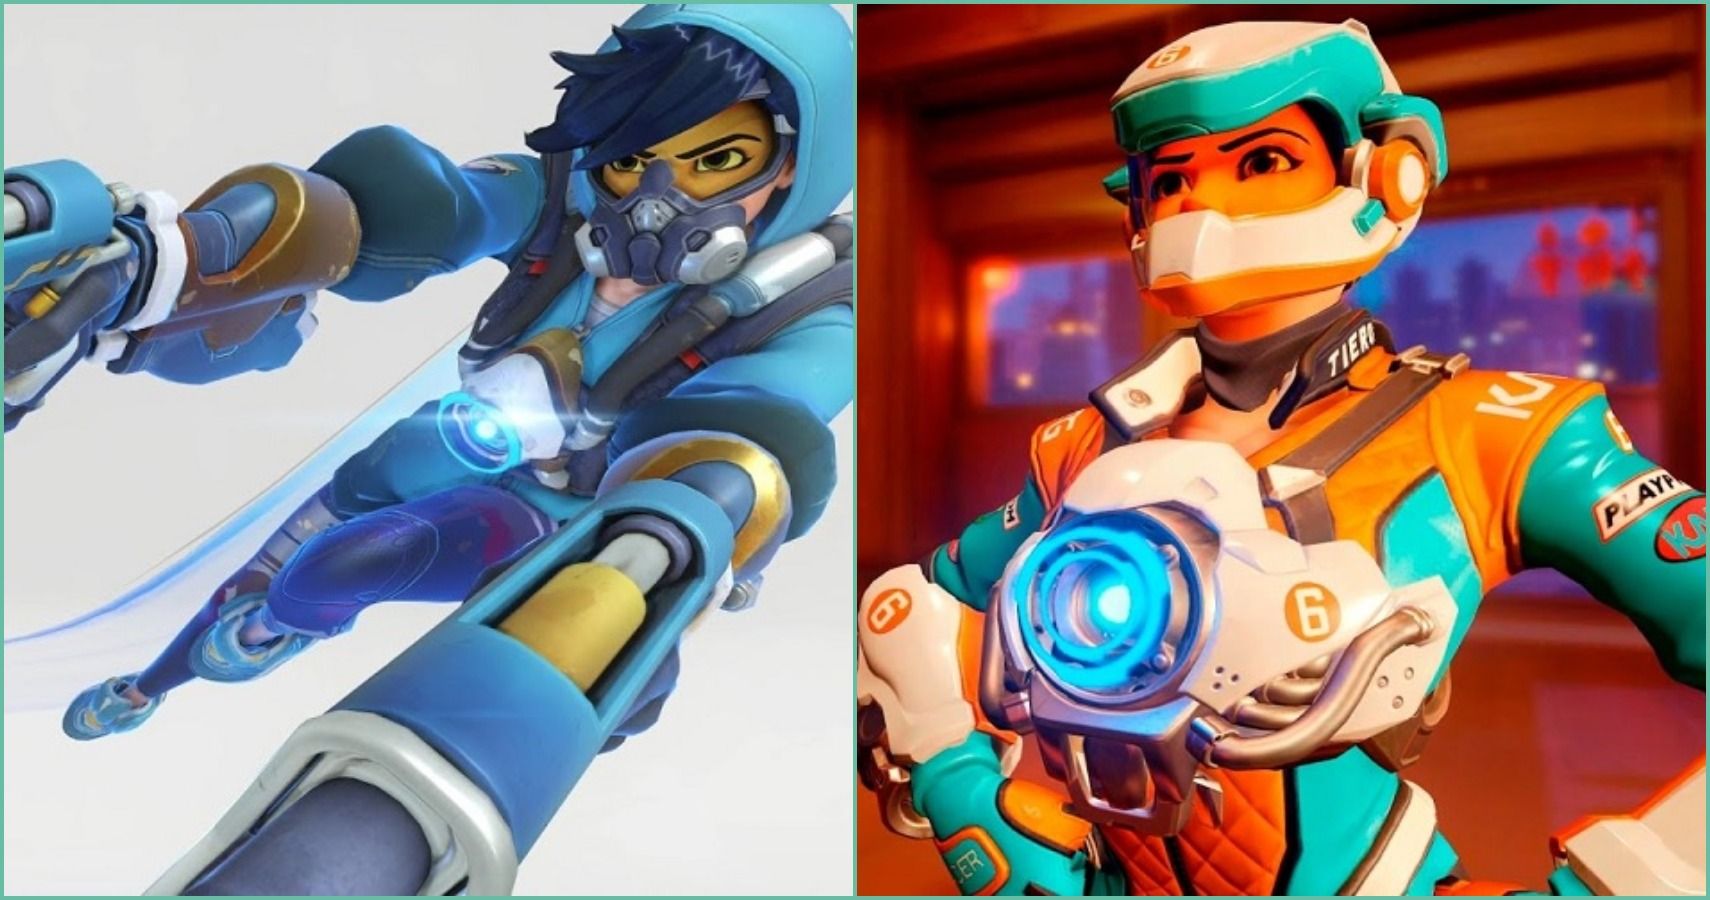 Rating every Tracer skin in Overwatch. #overwatch #overwatch2